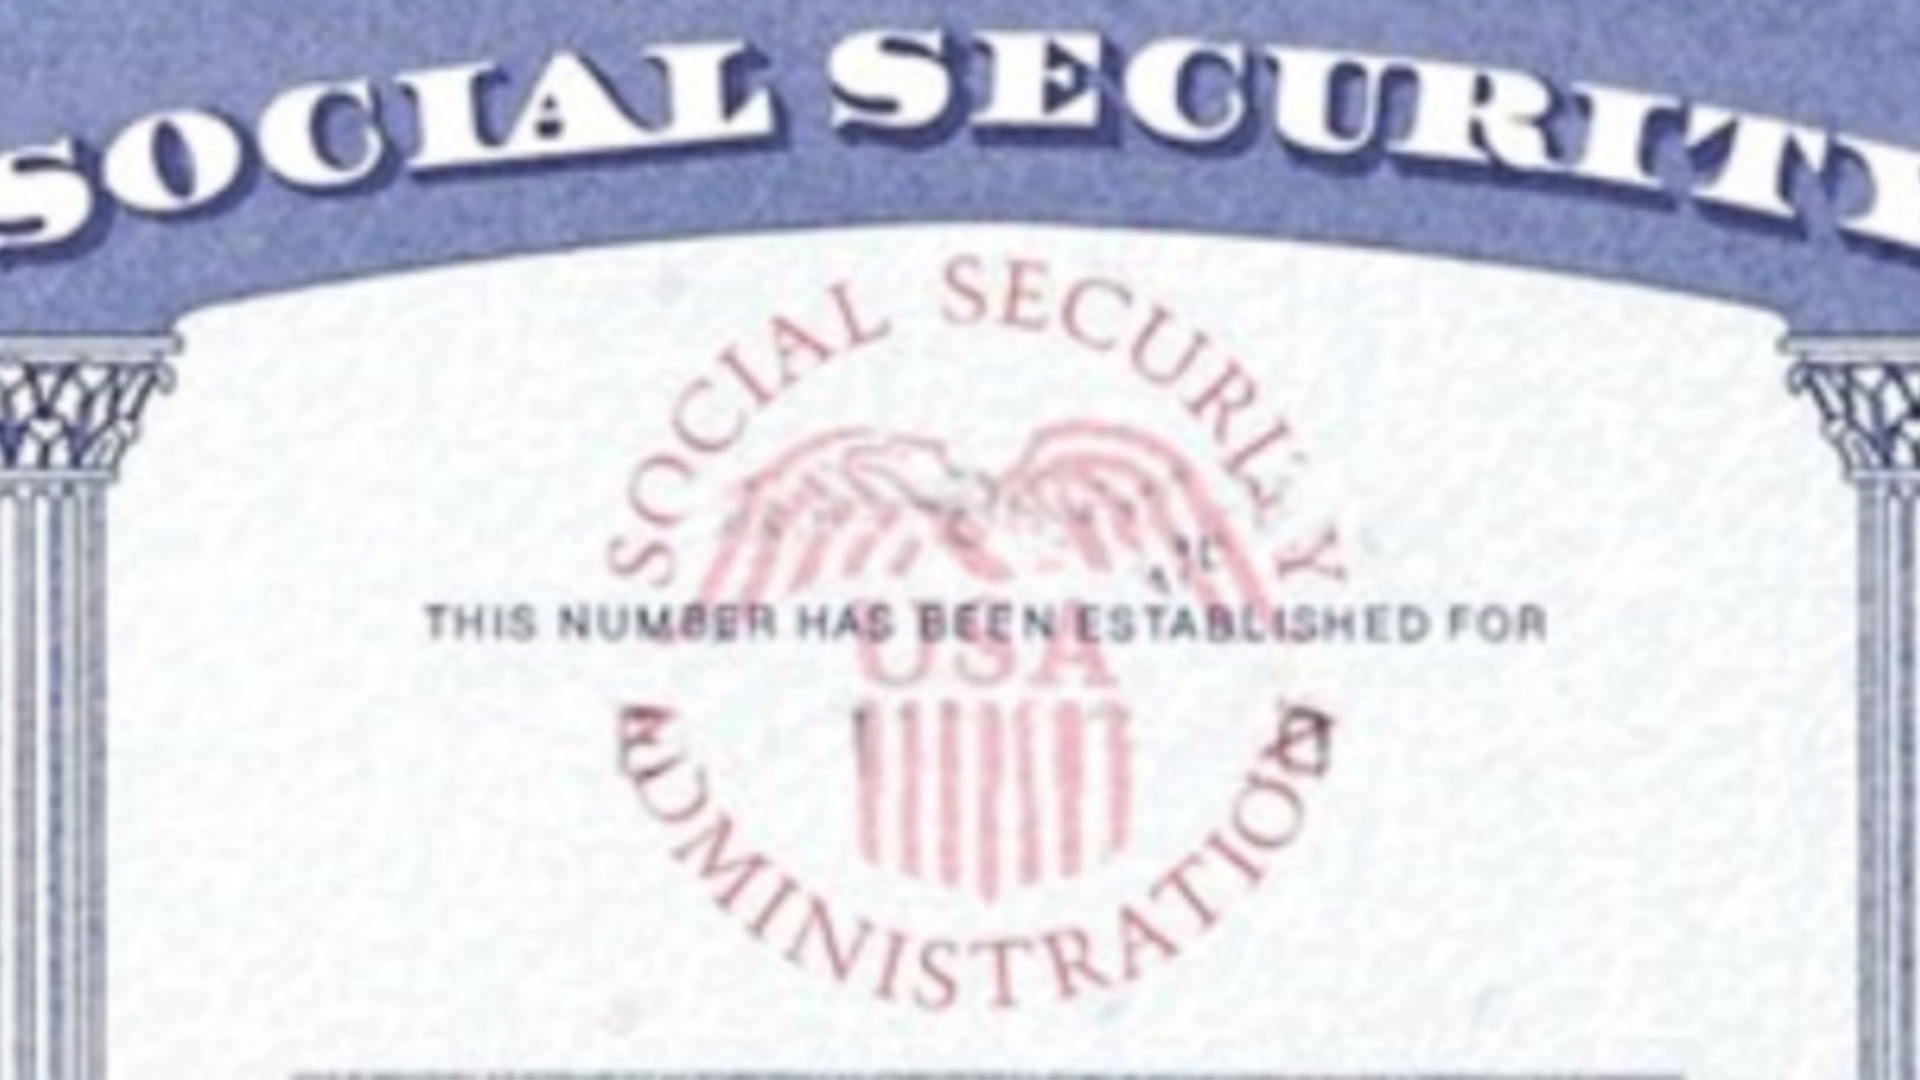 A viewer who's getting ready to retire reached out the Verify team about social security. To get to the bottom, we started at the top. The Social Security Administration (SSA) says the notion is a myth and misinformation.